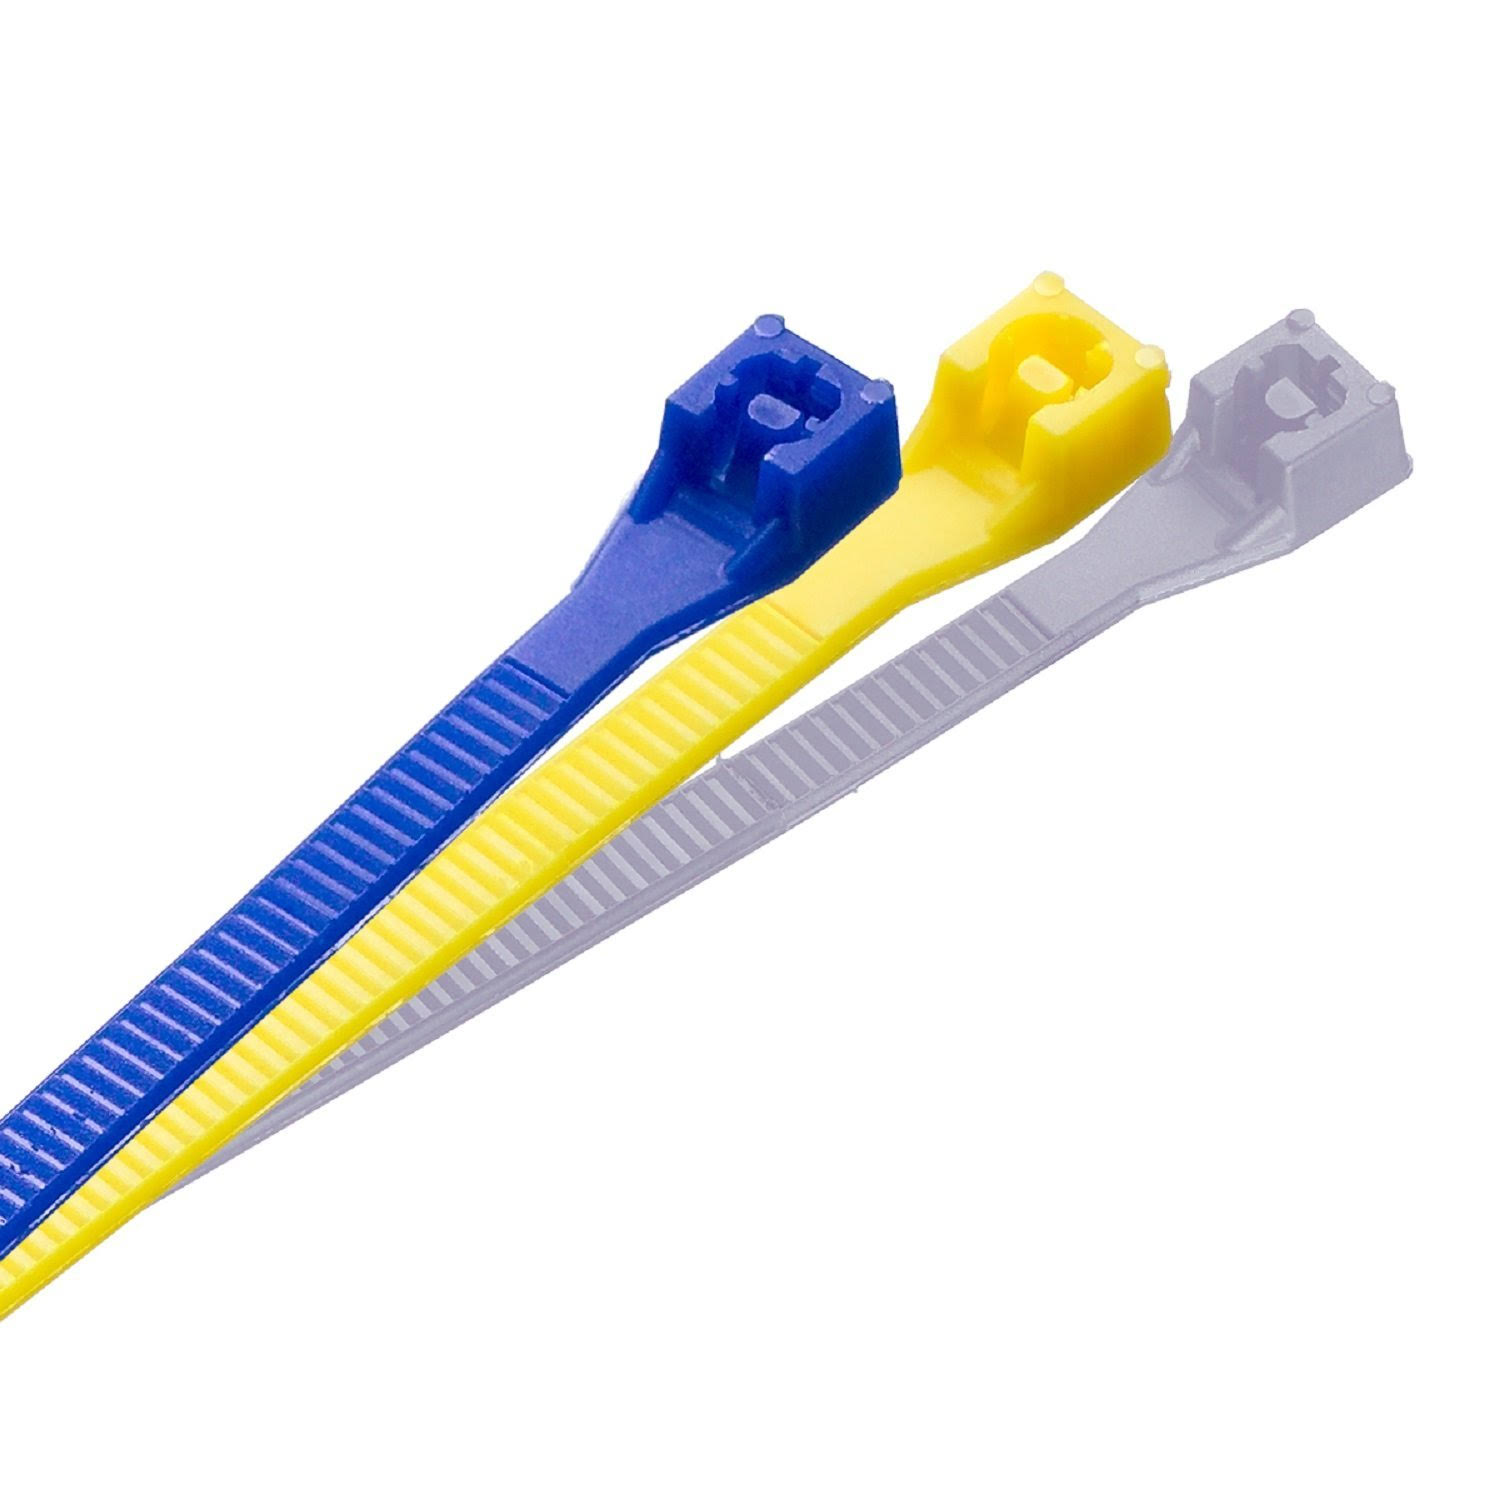 Gardner Bender Data Com Cable Tie - Assortment, 200pk, Gray, Blue and Yellow